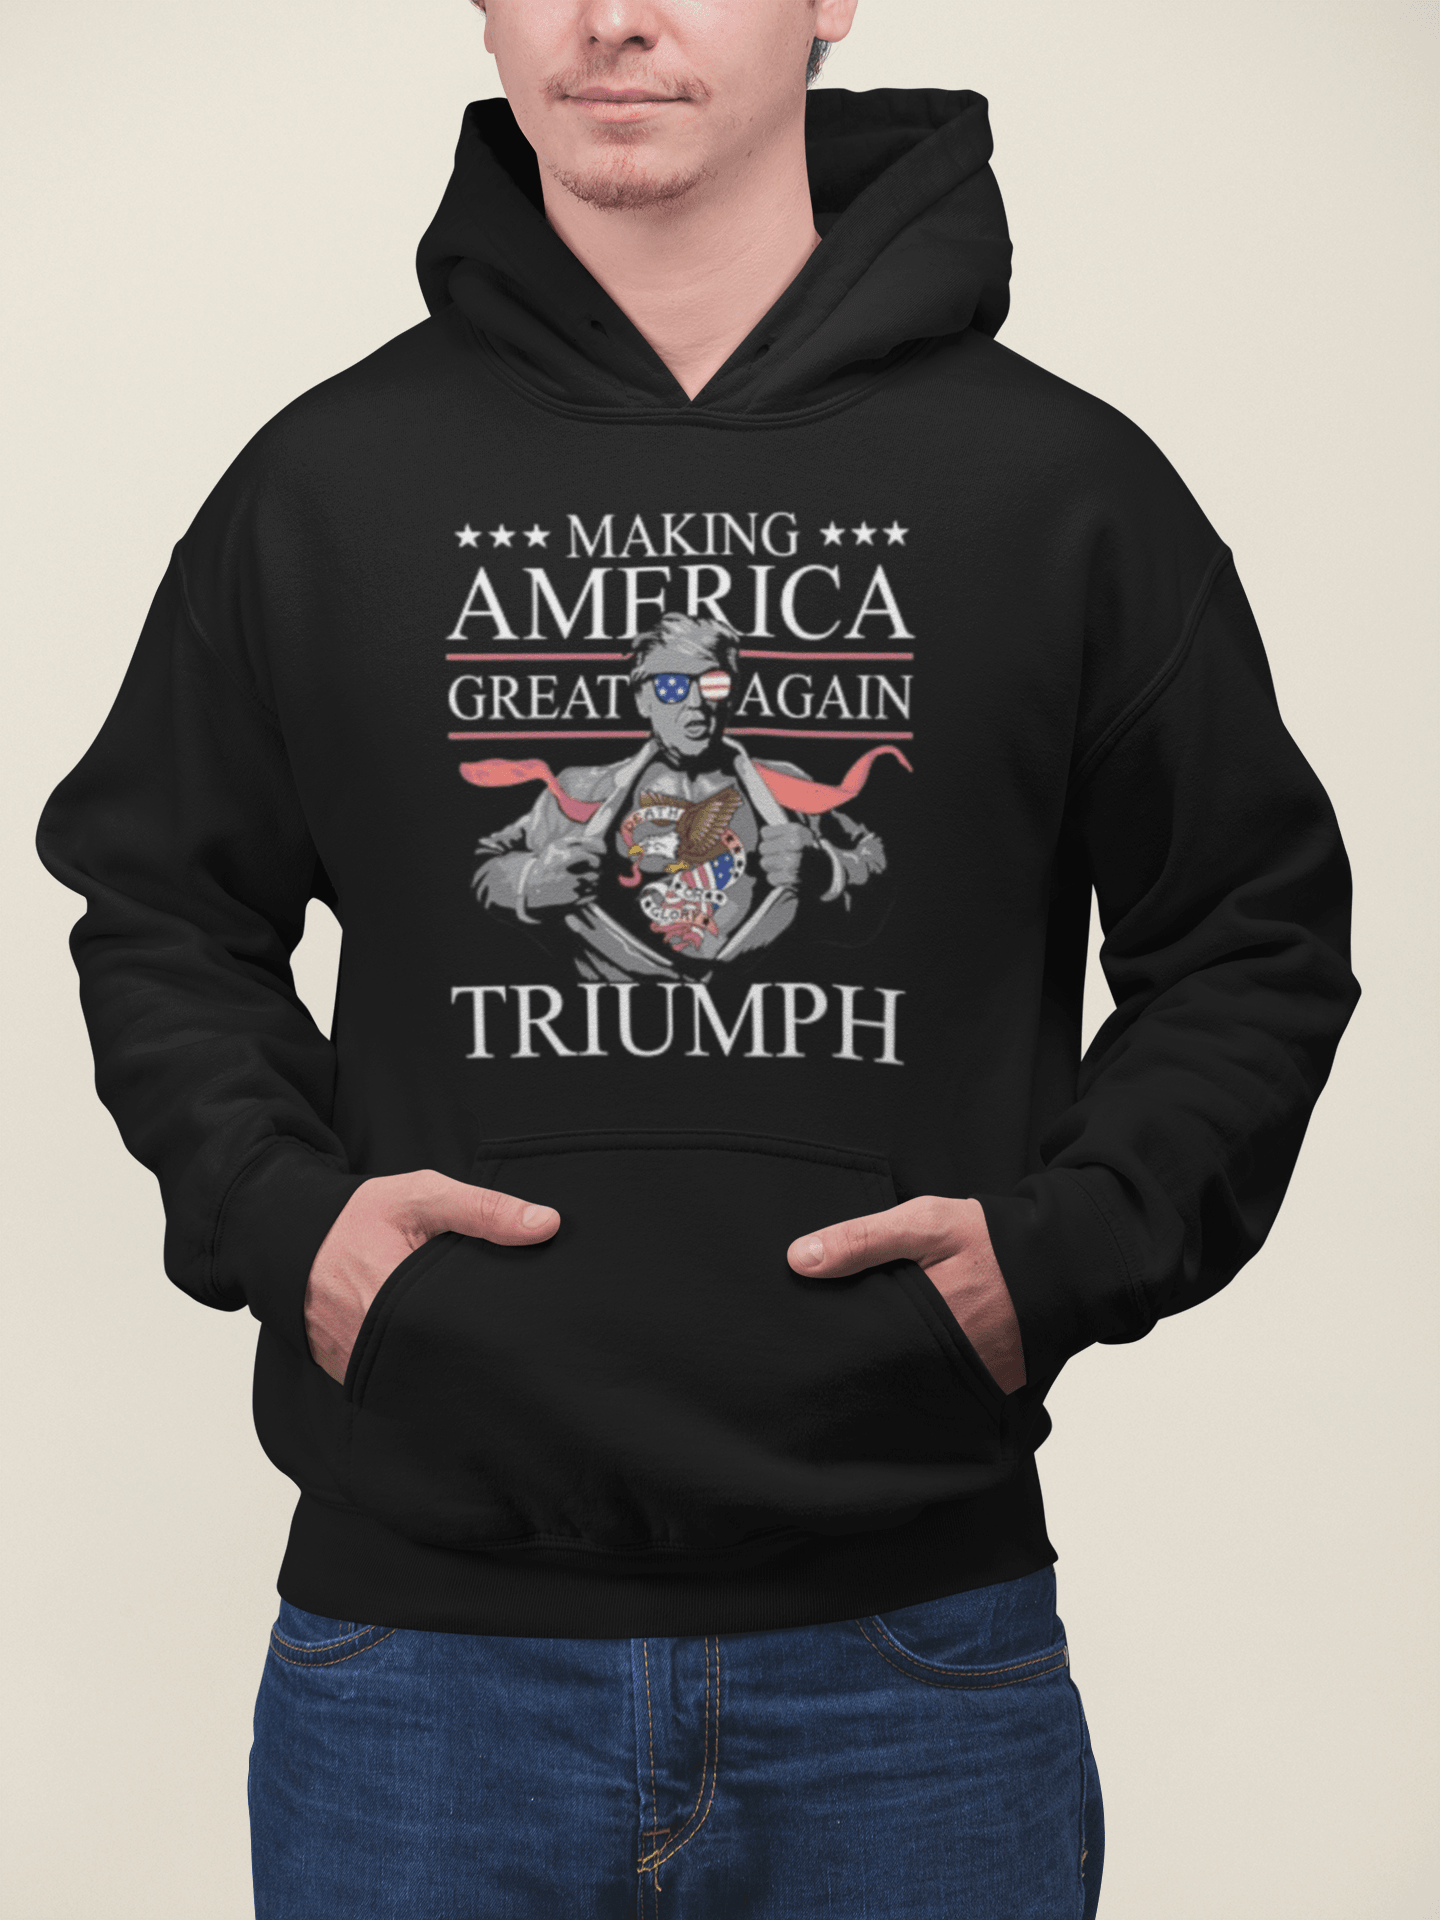 Trump Hoodie Making America Great Again Triumph Blended Cotton Midweight Unisex Pullover - TopKoalaTee